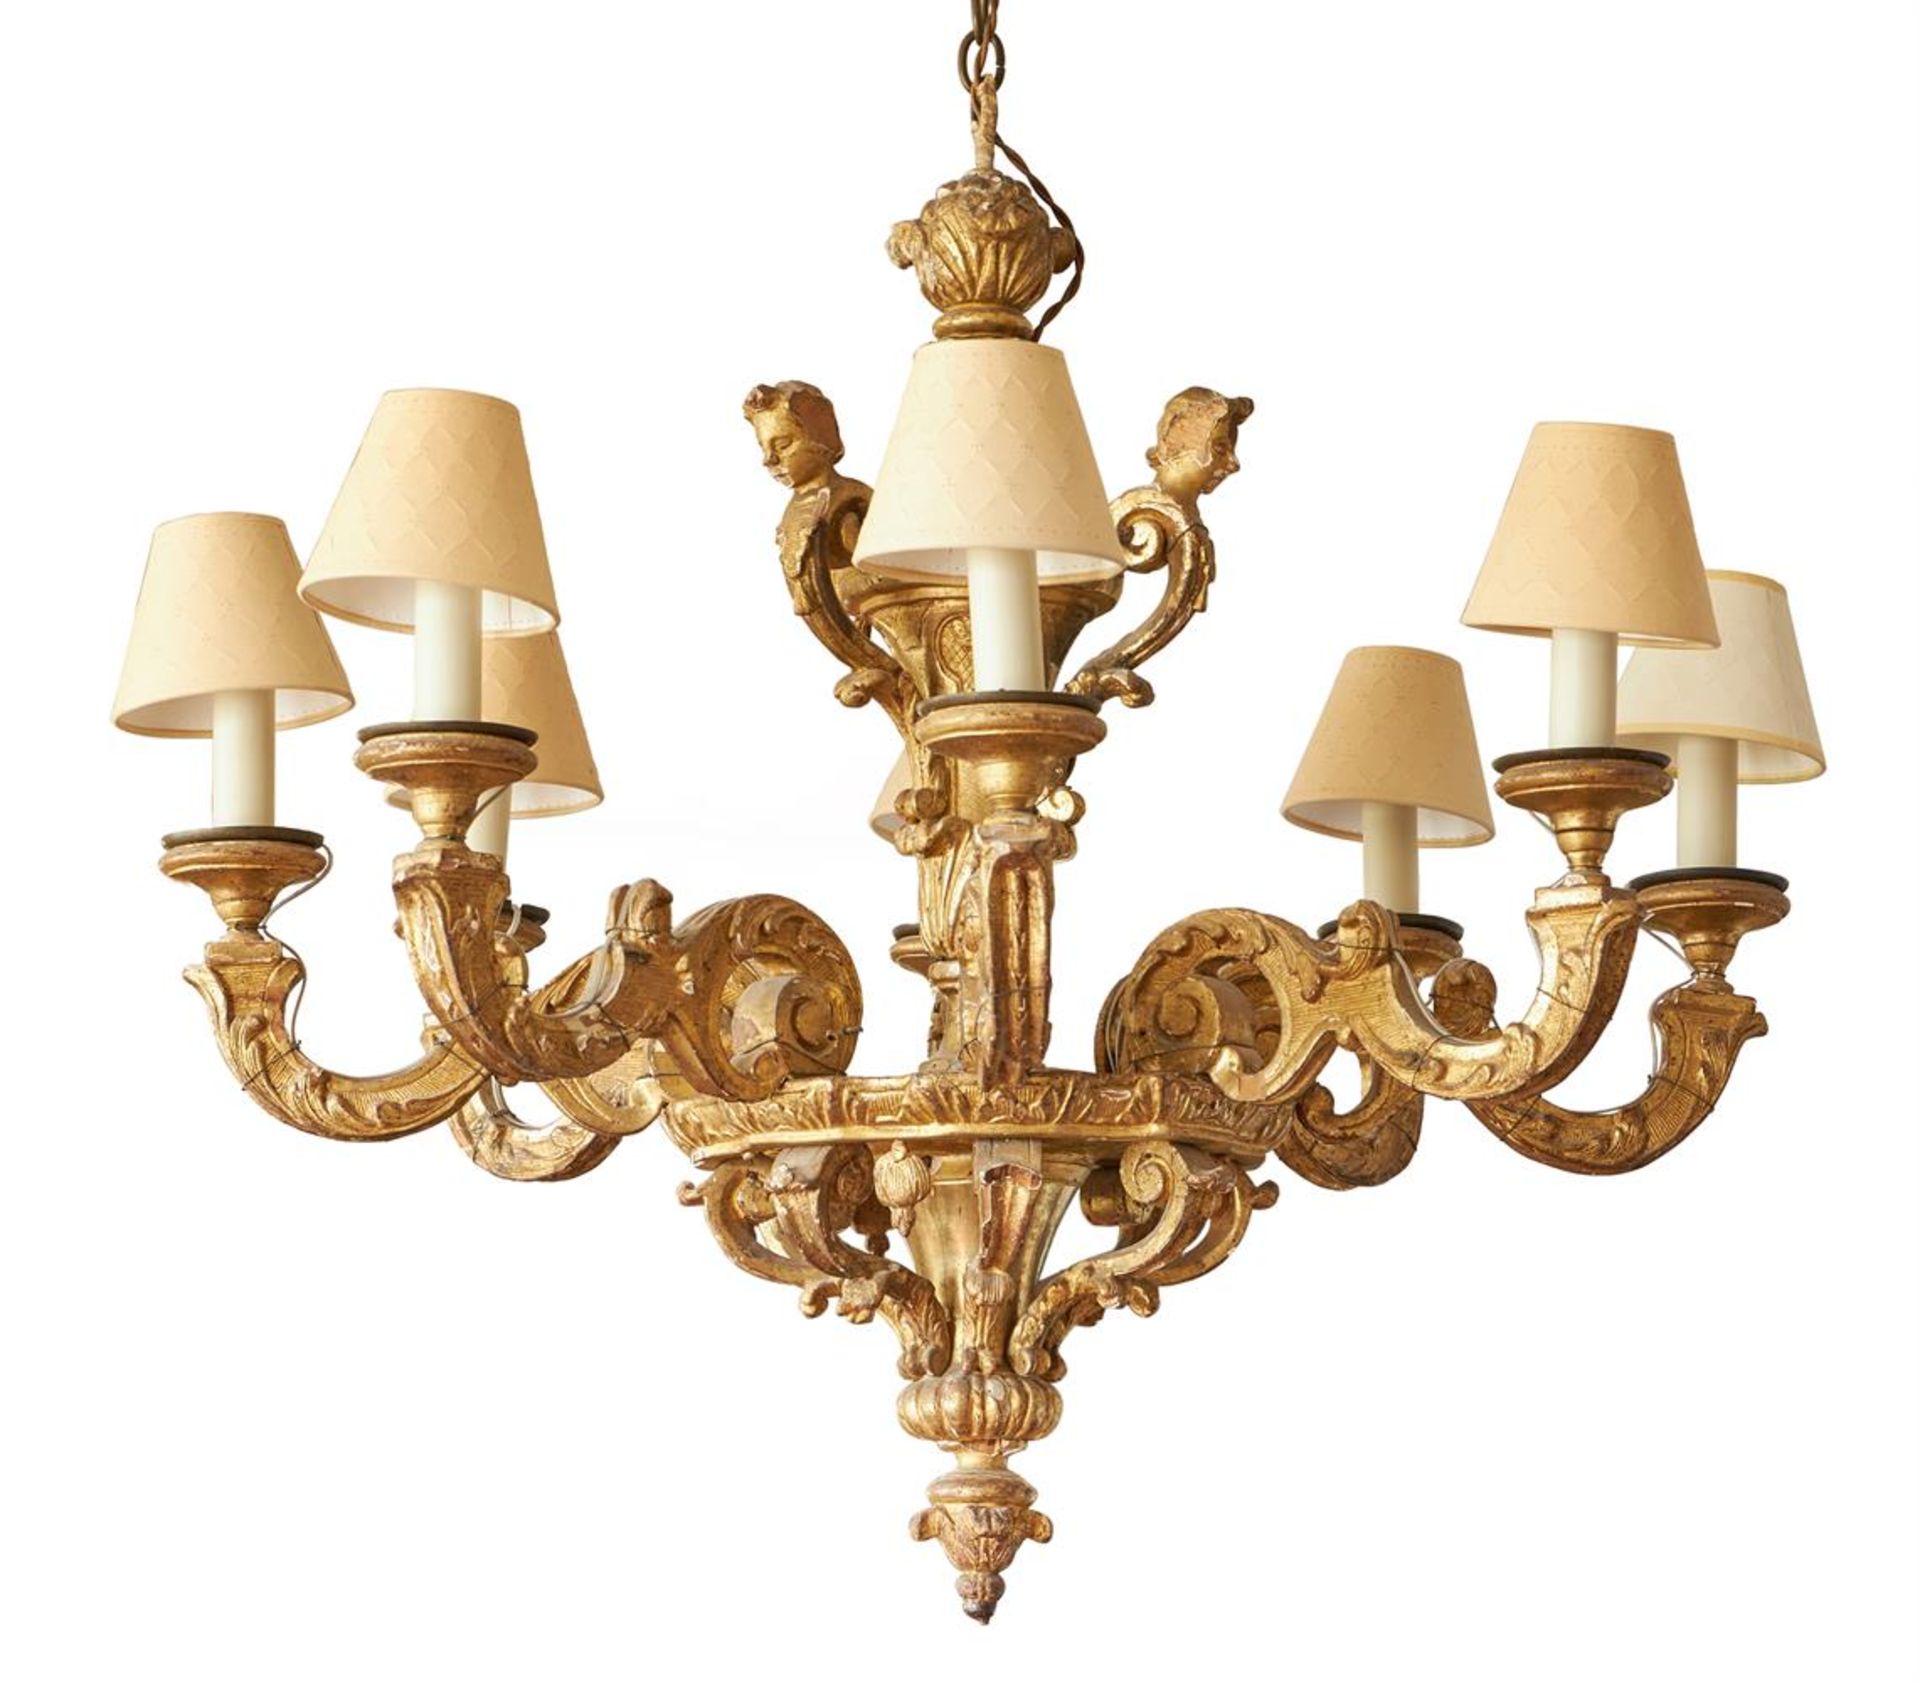 A CARVED GILTWOOD EIGHT LIGHT CHANDELIER FRENCH, AFTER ANDRE-CHARLES BOULLE, EARLY 18TH CENTURY - Image 3 of 5